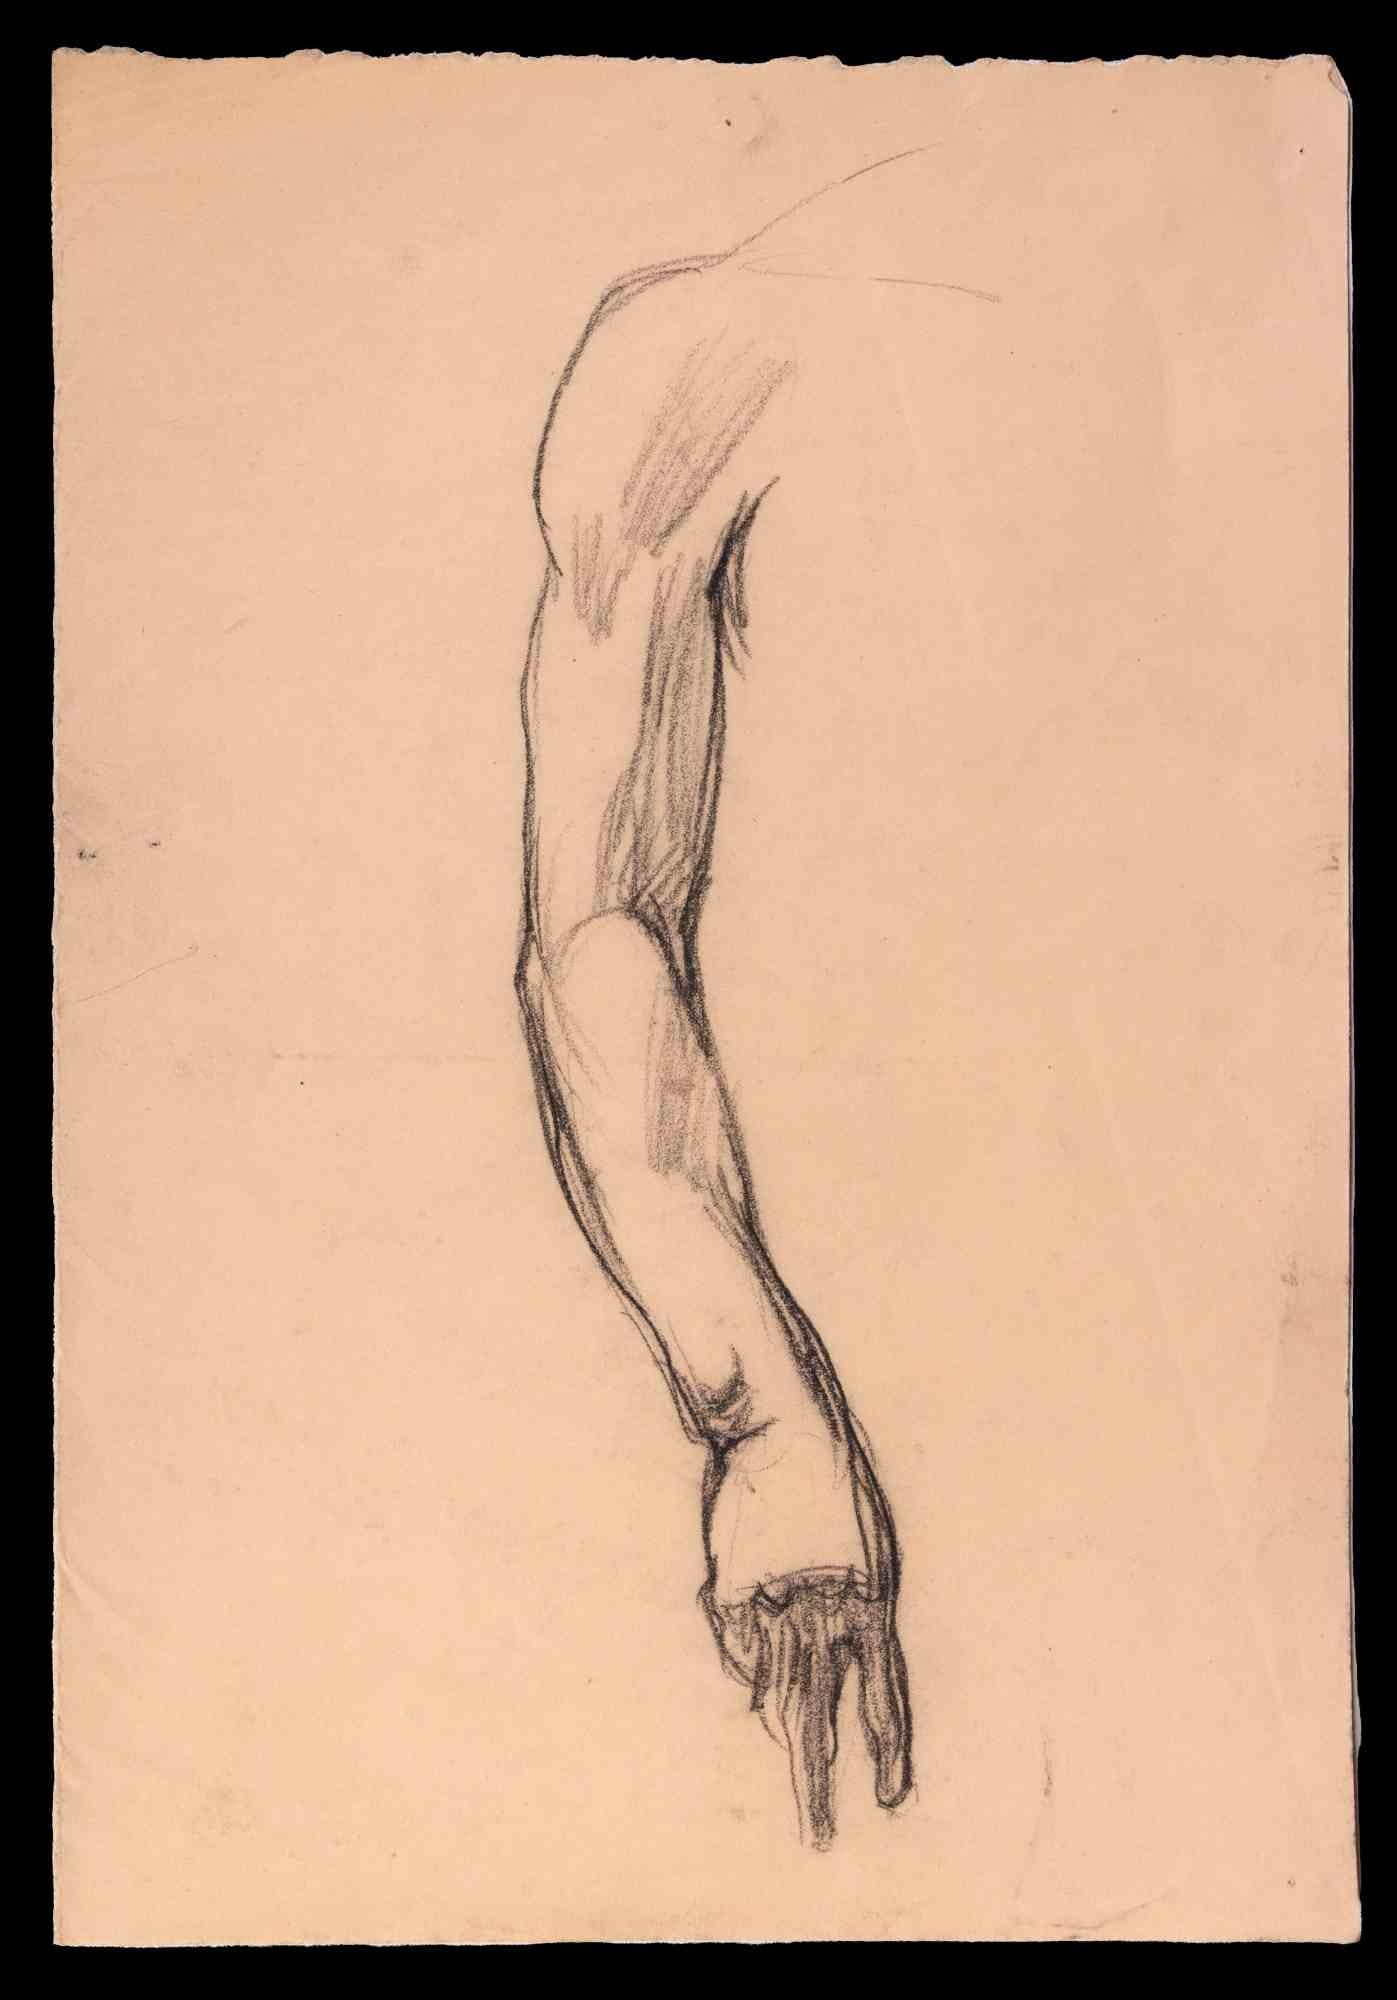 Pierre Georges Jeanniot Figurative Art - Study For an Arm - Original Drawing - Early 20th Century